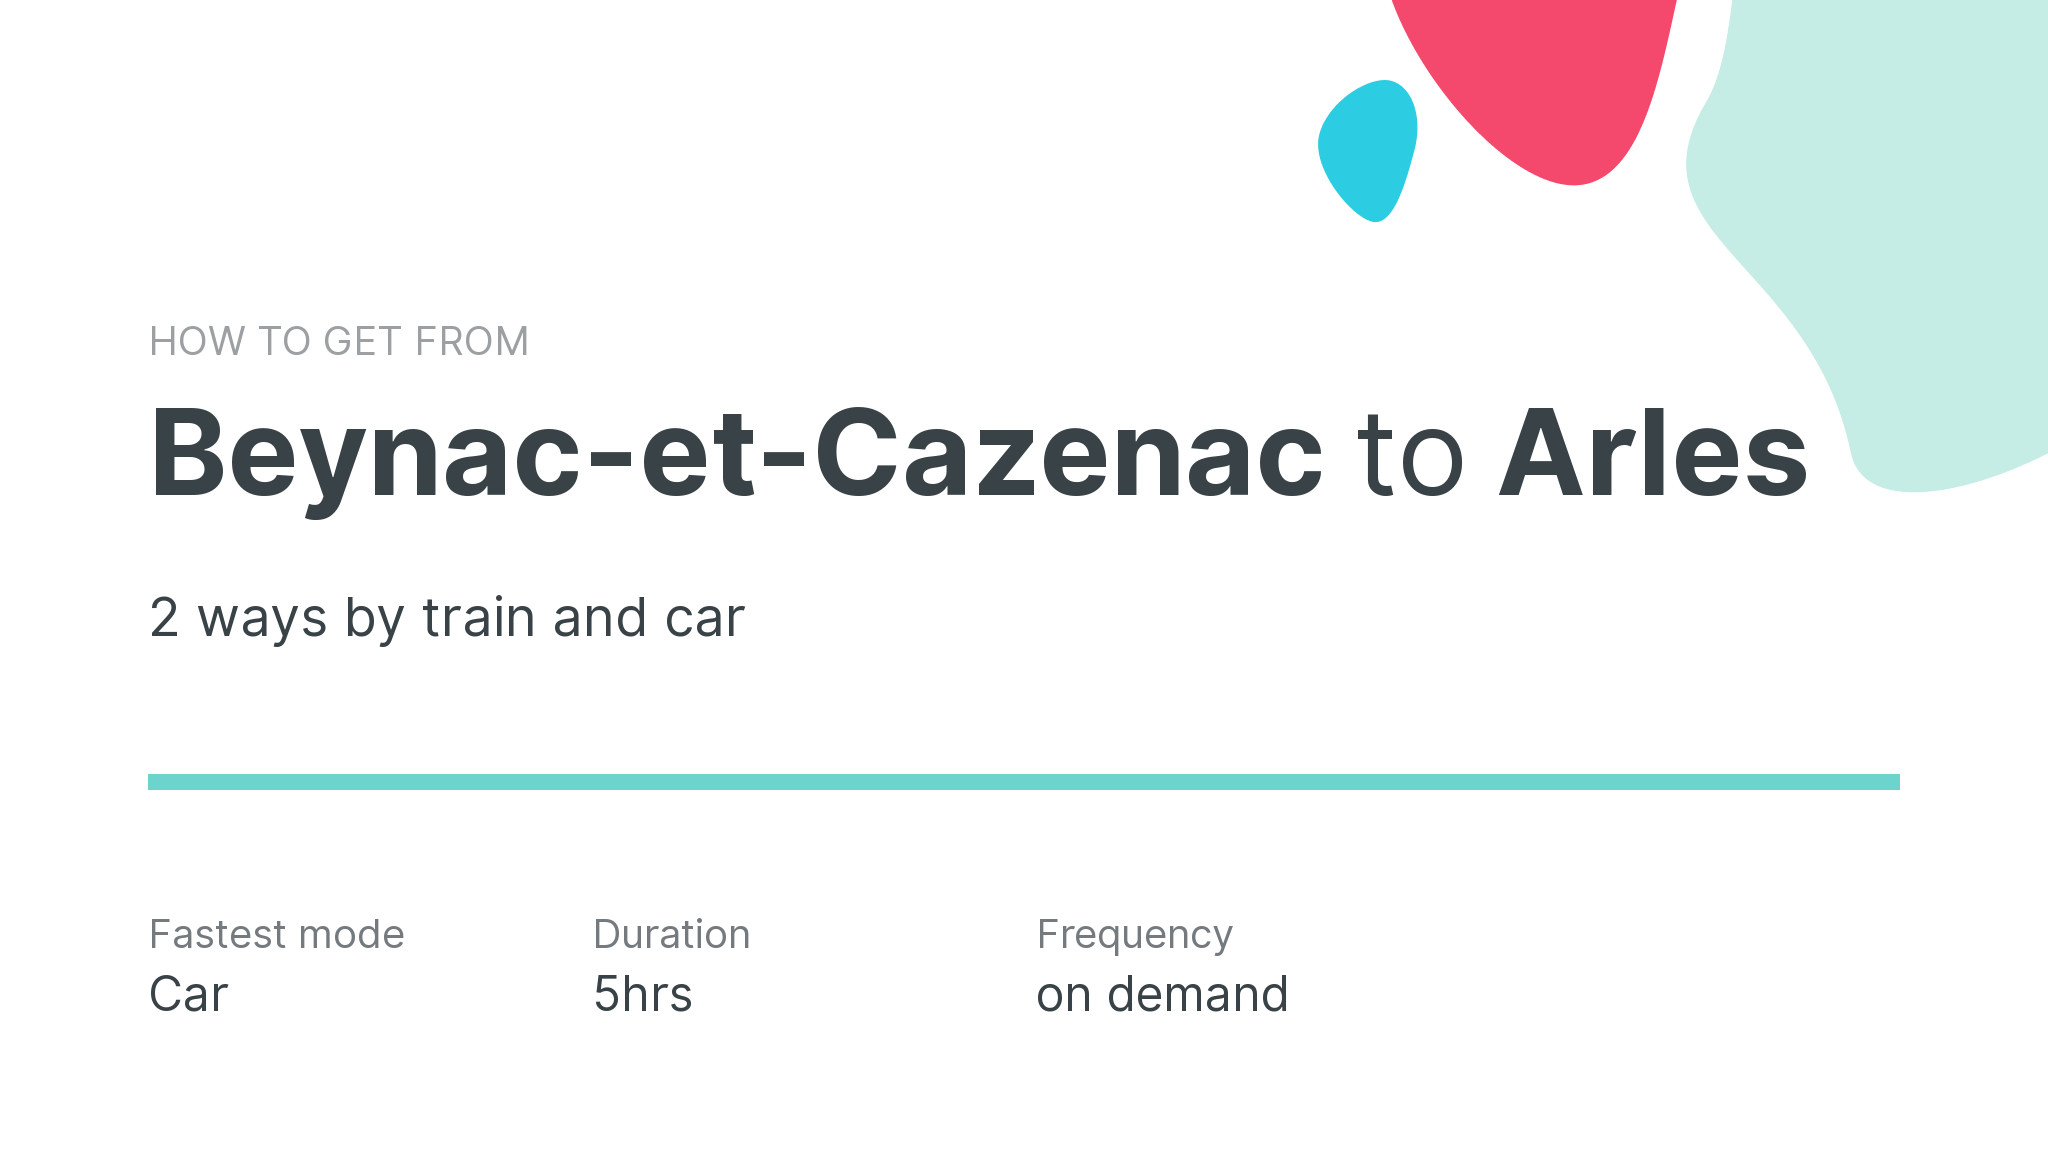 How do I get from Beynac-et-Cazenac to Arles